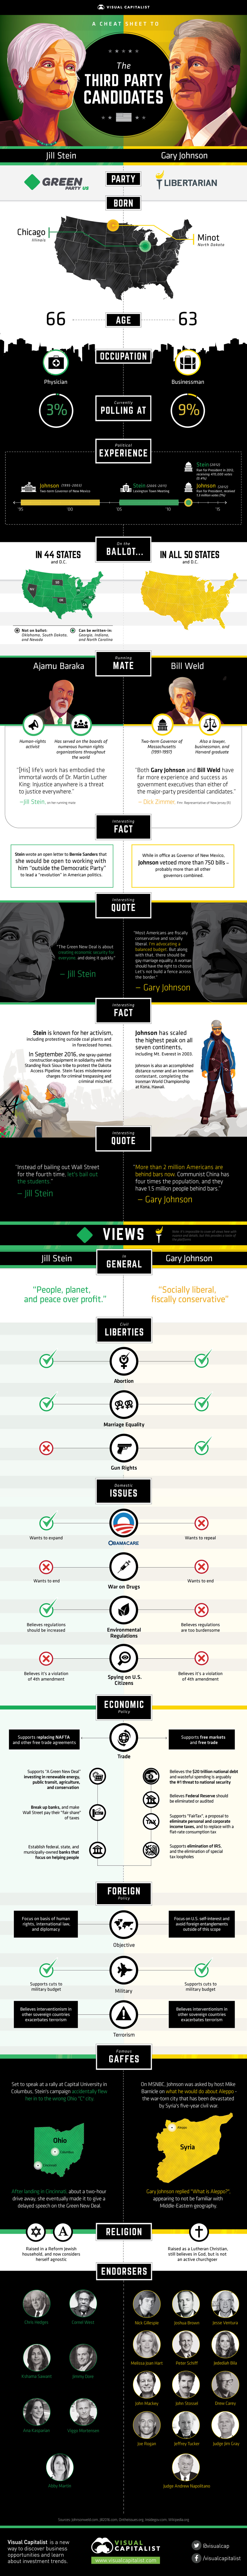 Cheat Sheet: The Third Party Presidential Candidates